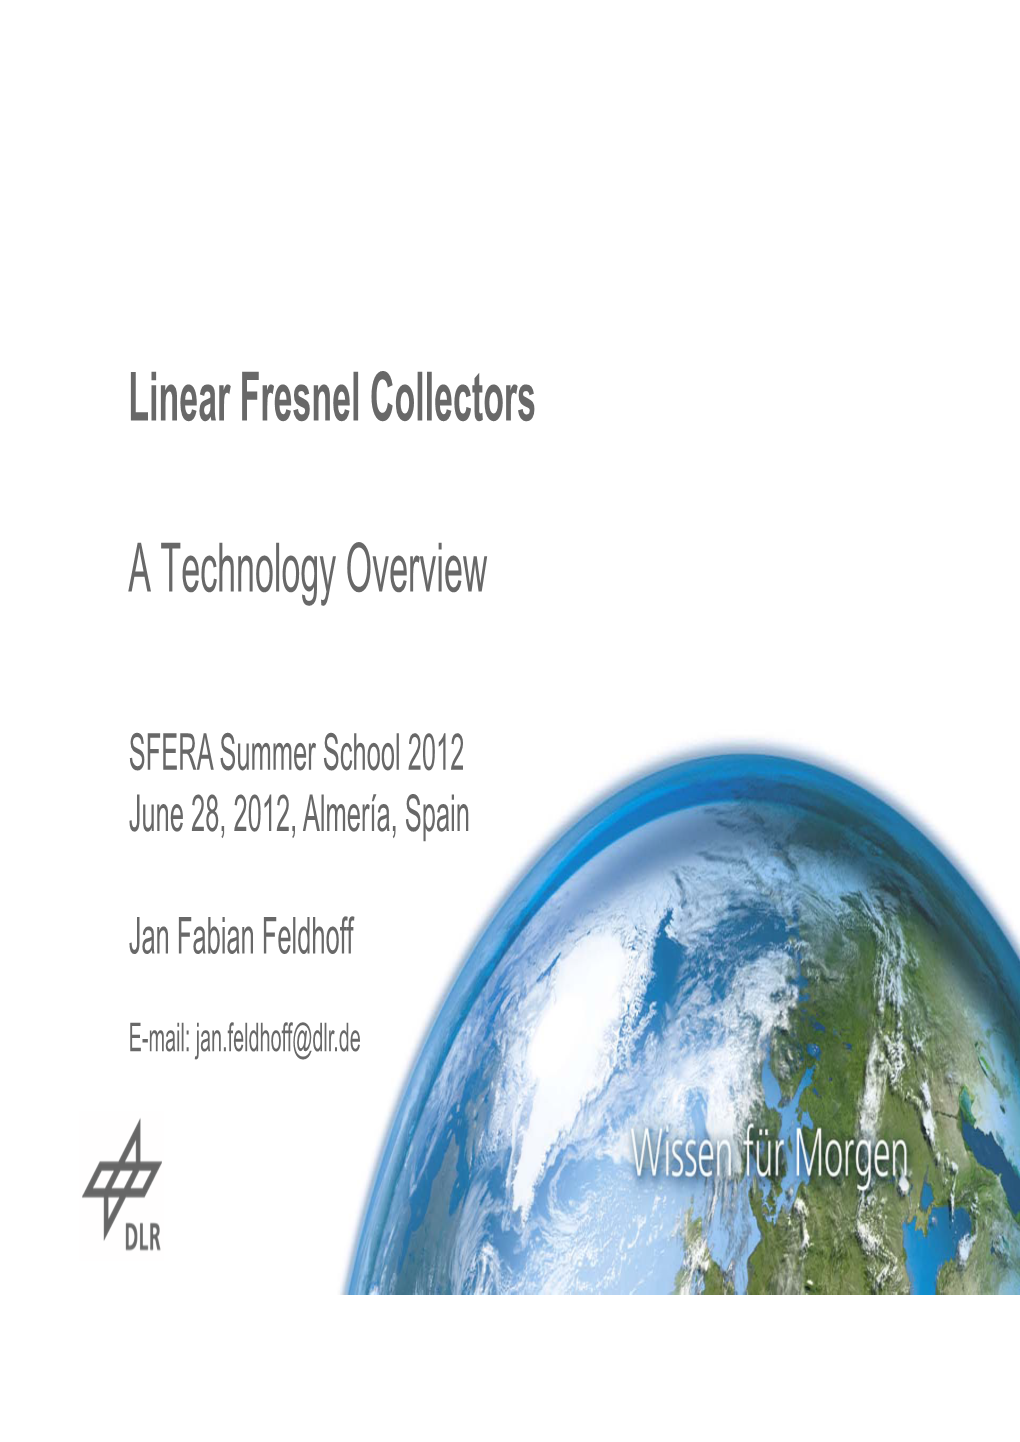 Linear Fresnel Collectors a Technology Overview